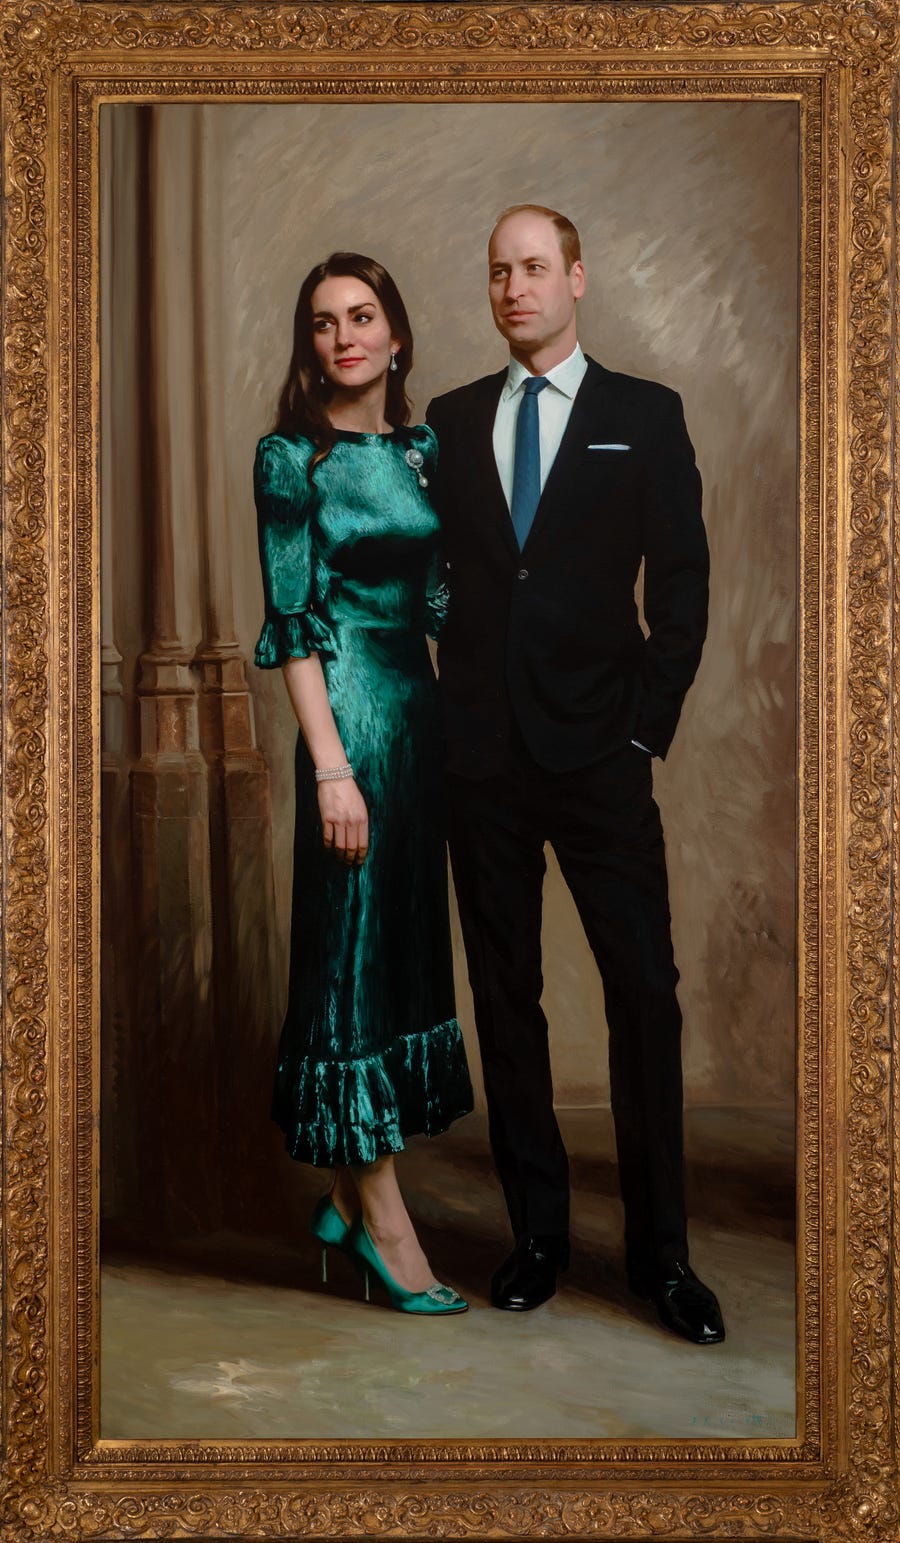 The first joint portrait of Prince William, Duke of Cambridge, and Catherine, Duchess of Cambridge, by British artist Jamie Coreth, released by Kensington Palace on June 23, 2022 in Cambridge, England.